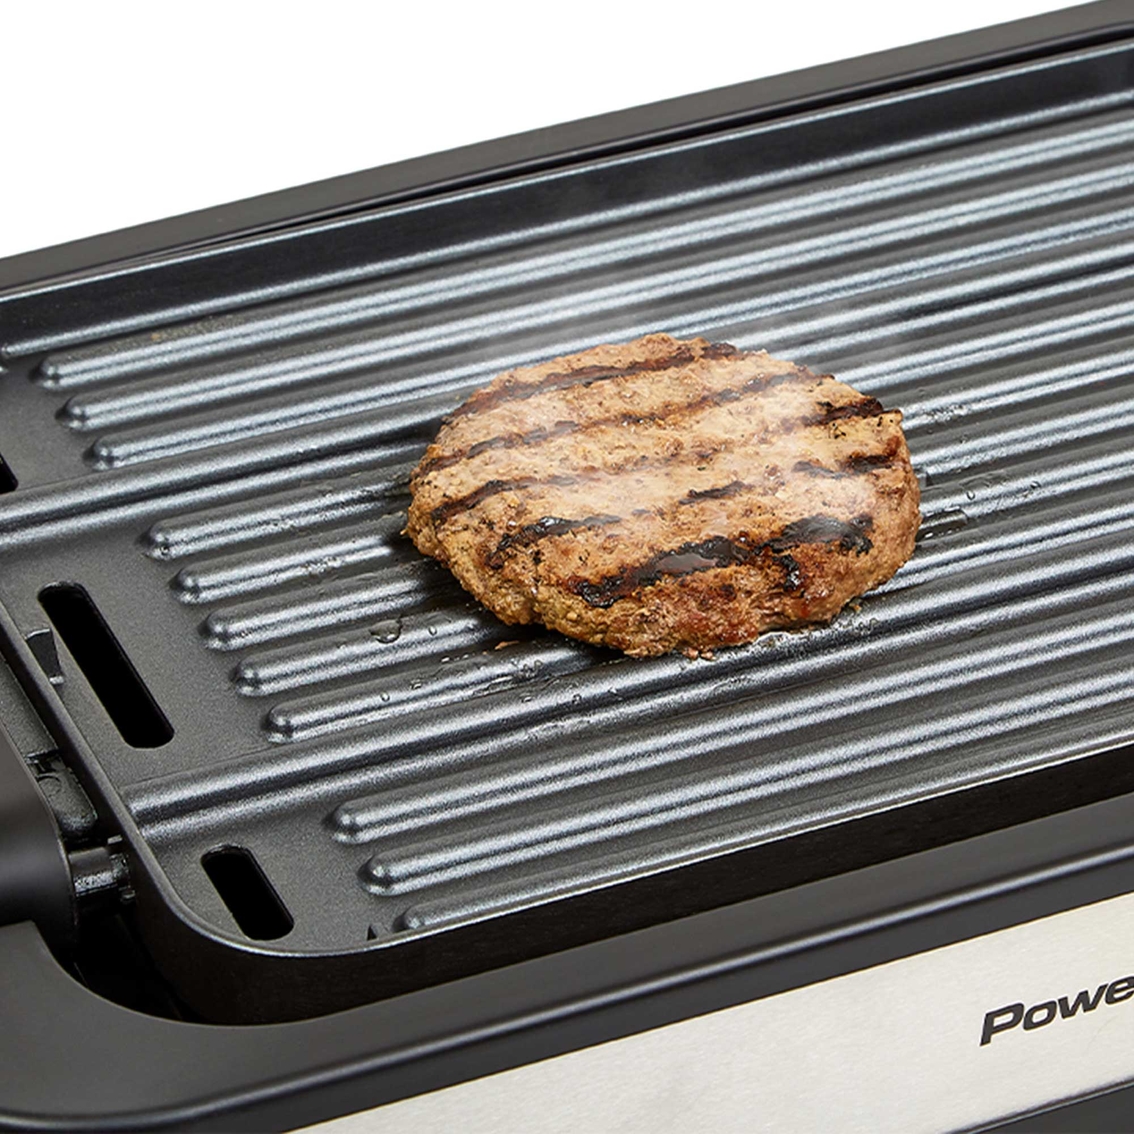 Tristar As Seen On TV PowerXL Indoor Grill and Griddle - Image 6 of 6